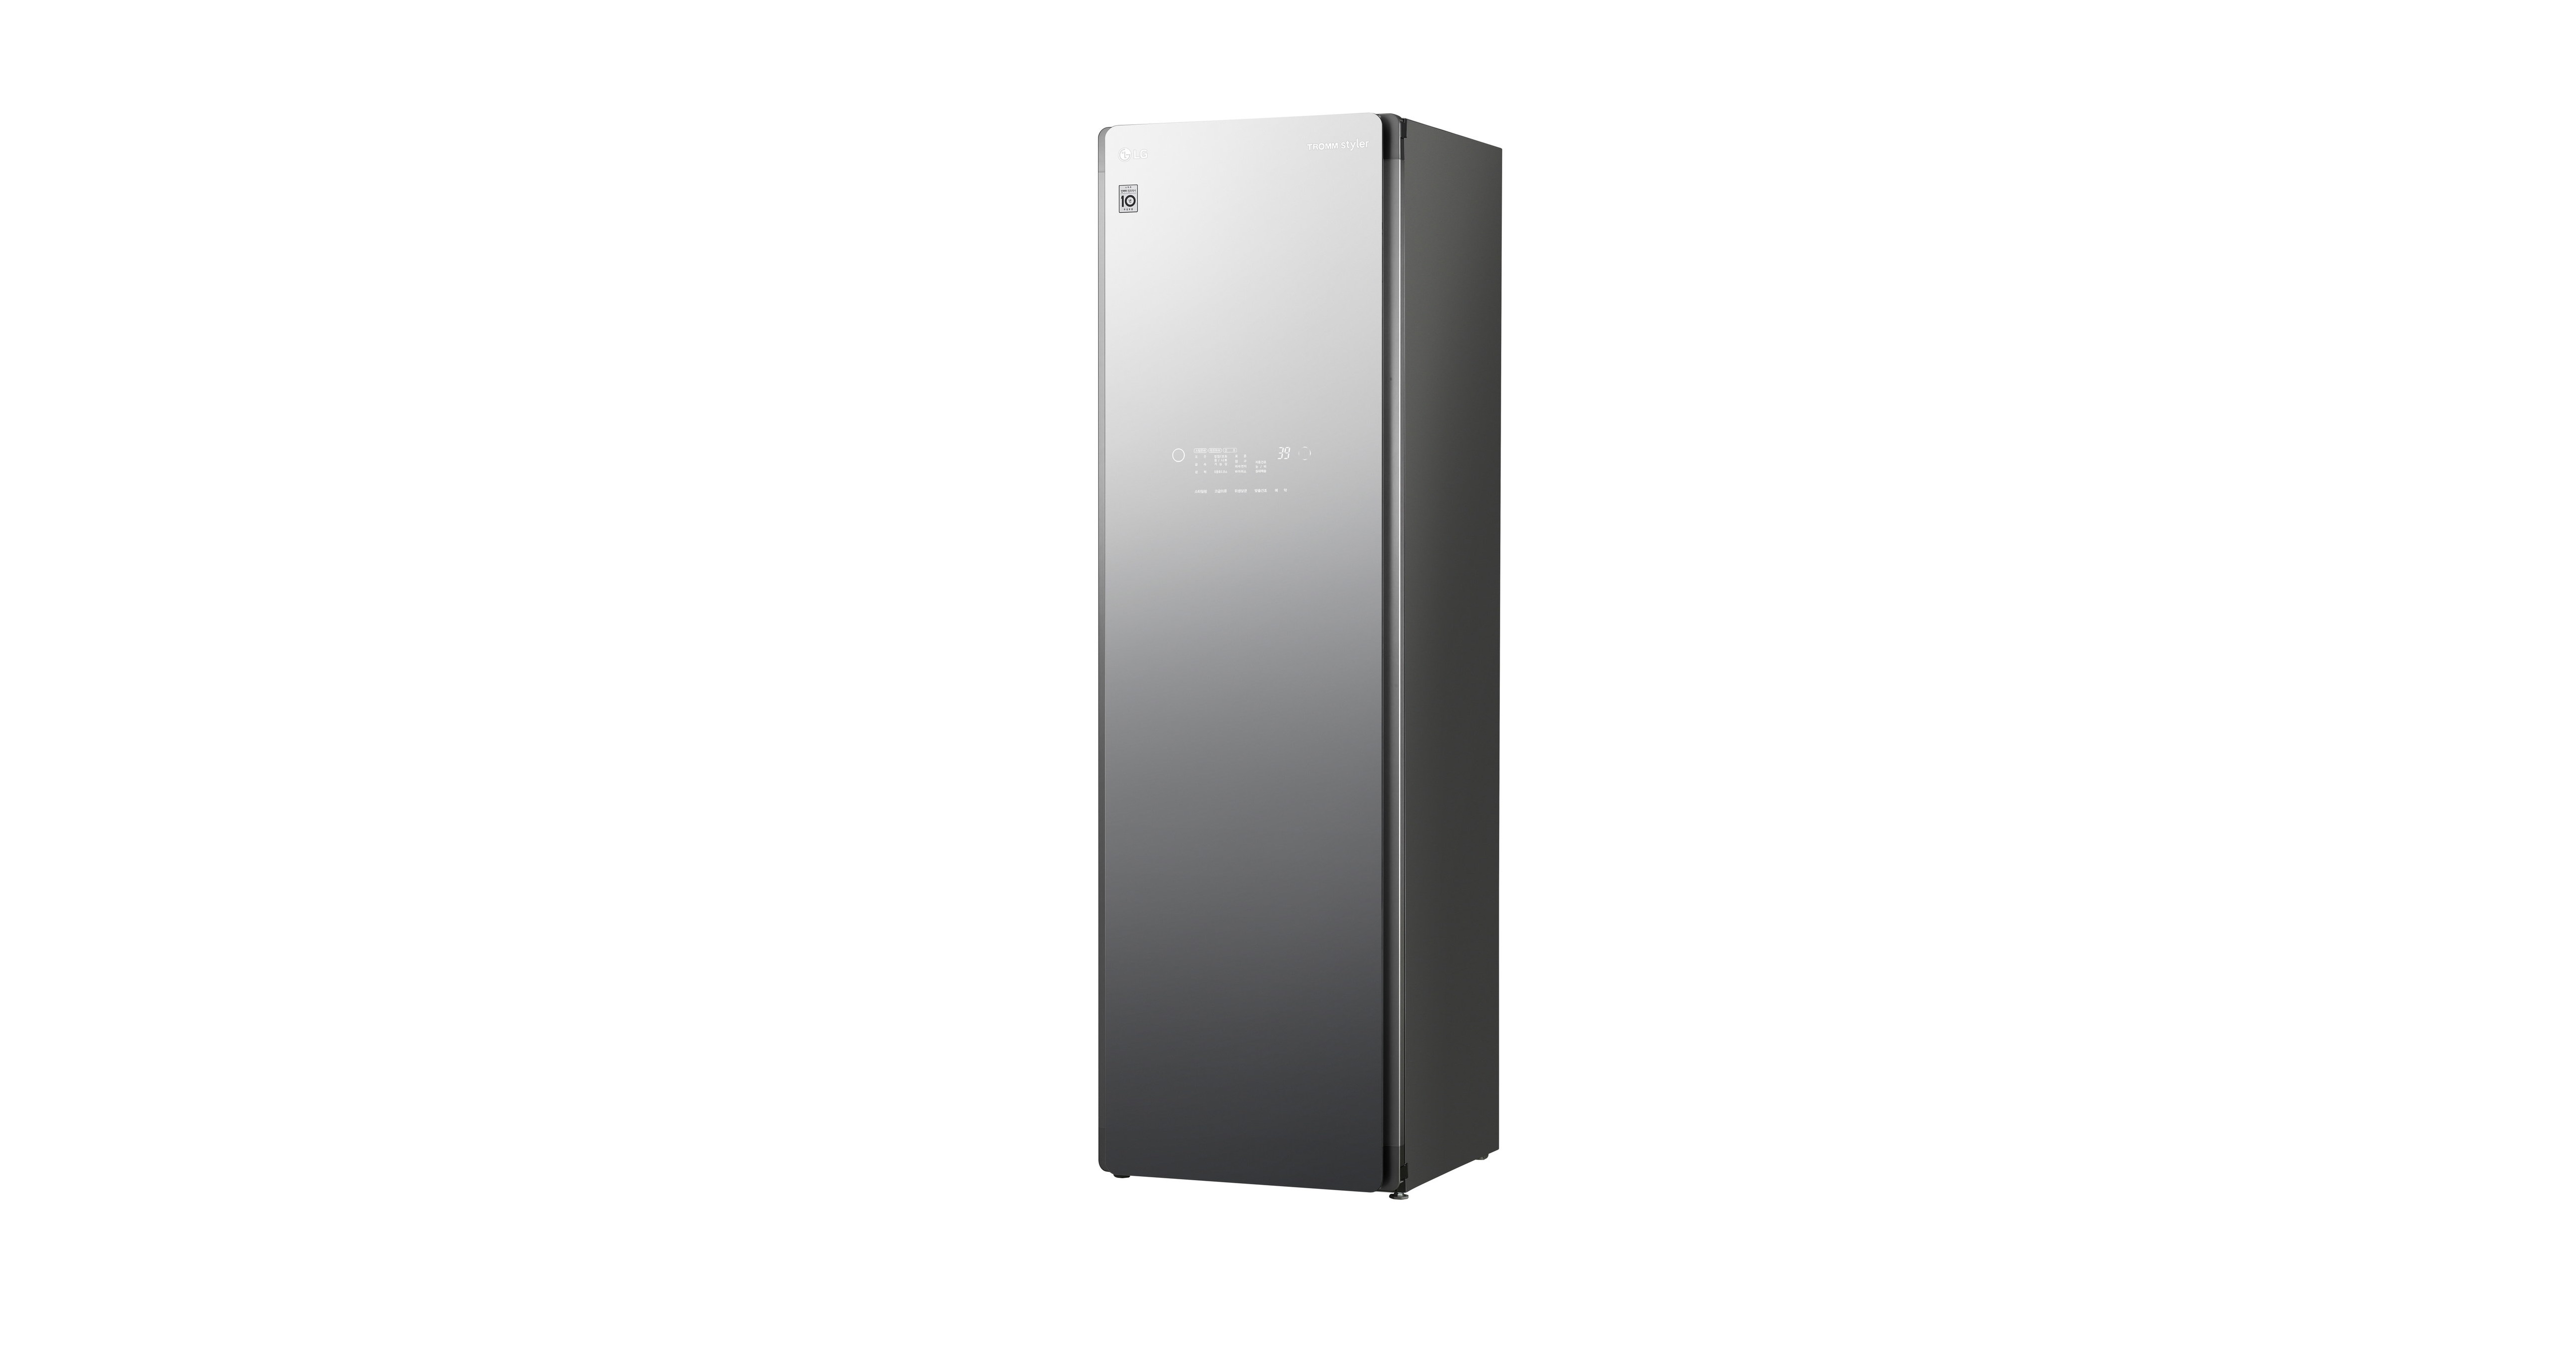 LG Styler Steam Closet Line Expands For 2020 With New, LargerCapacity Model